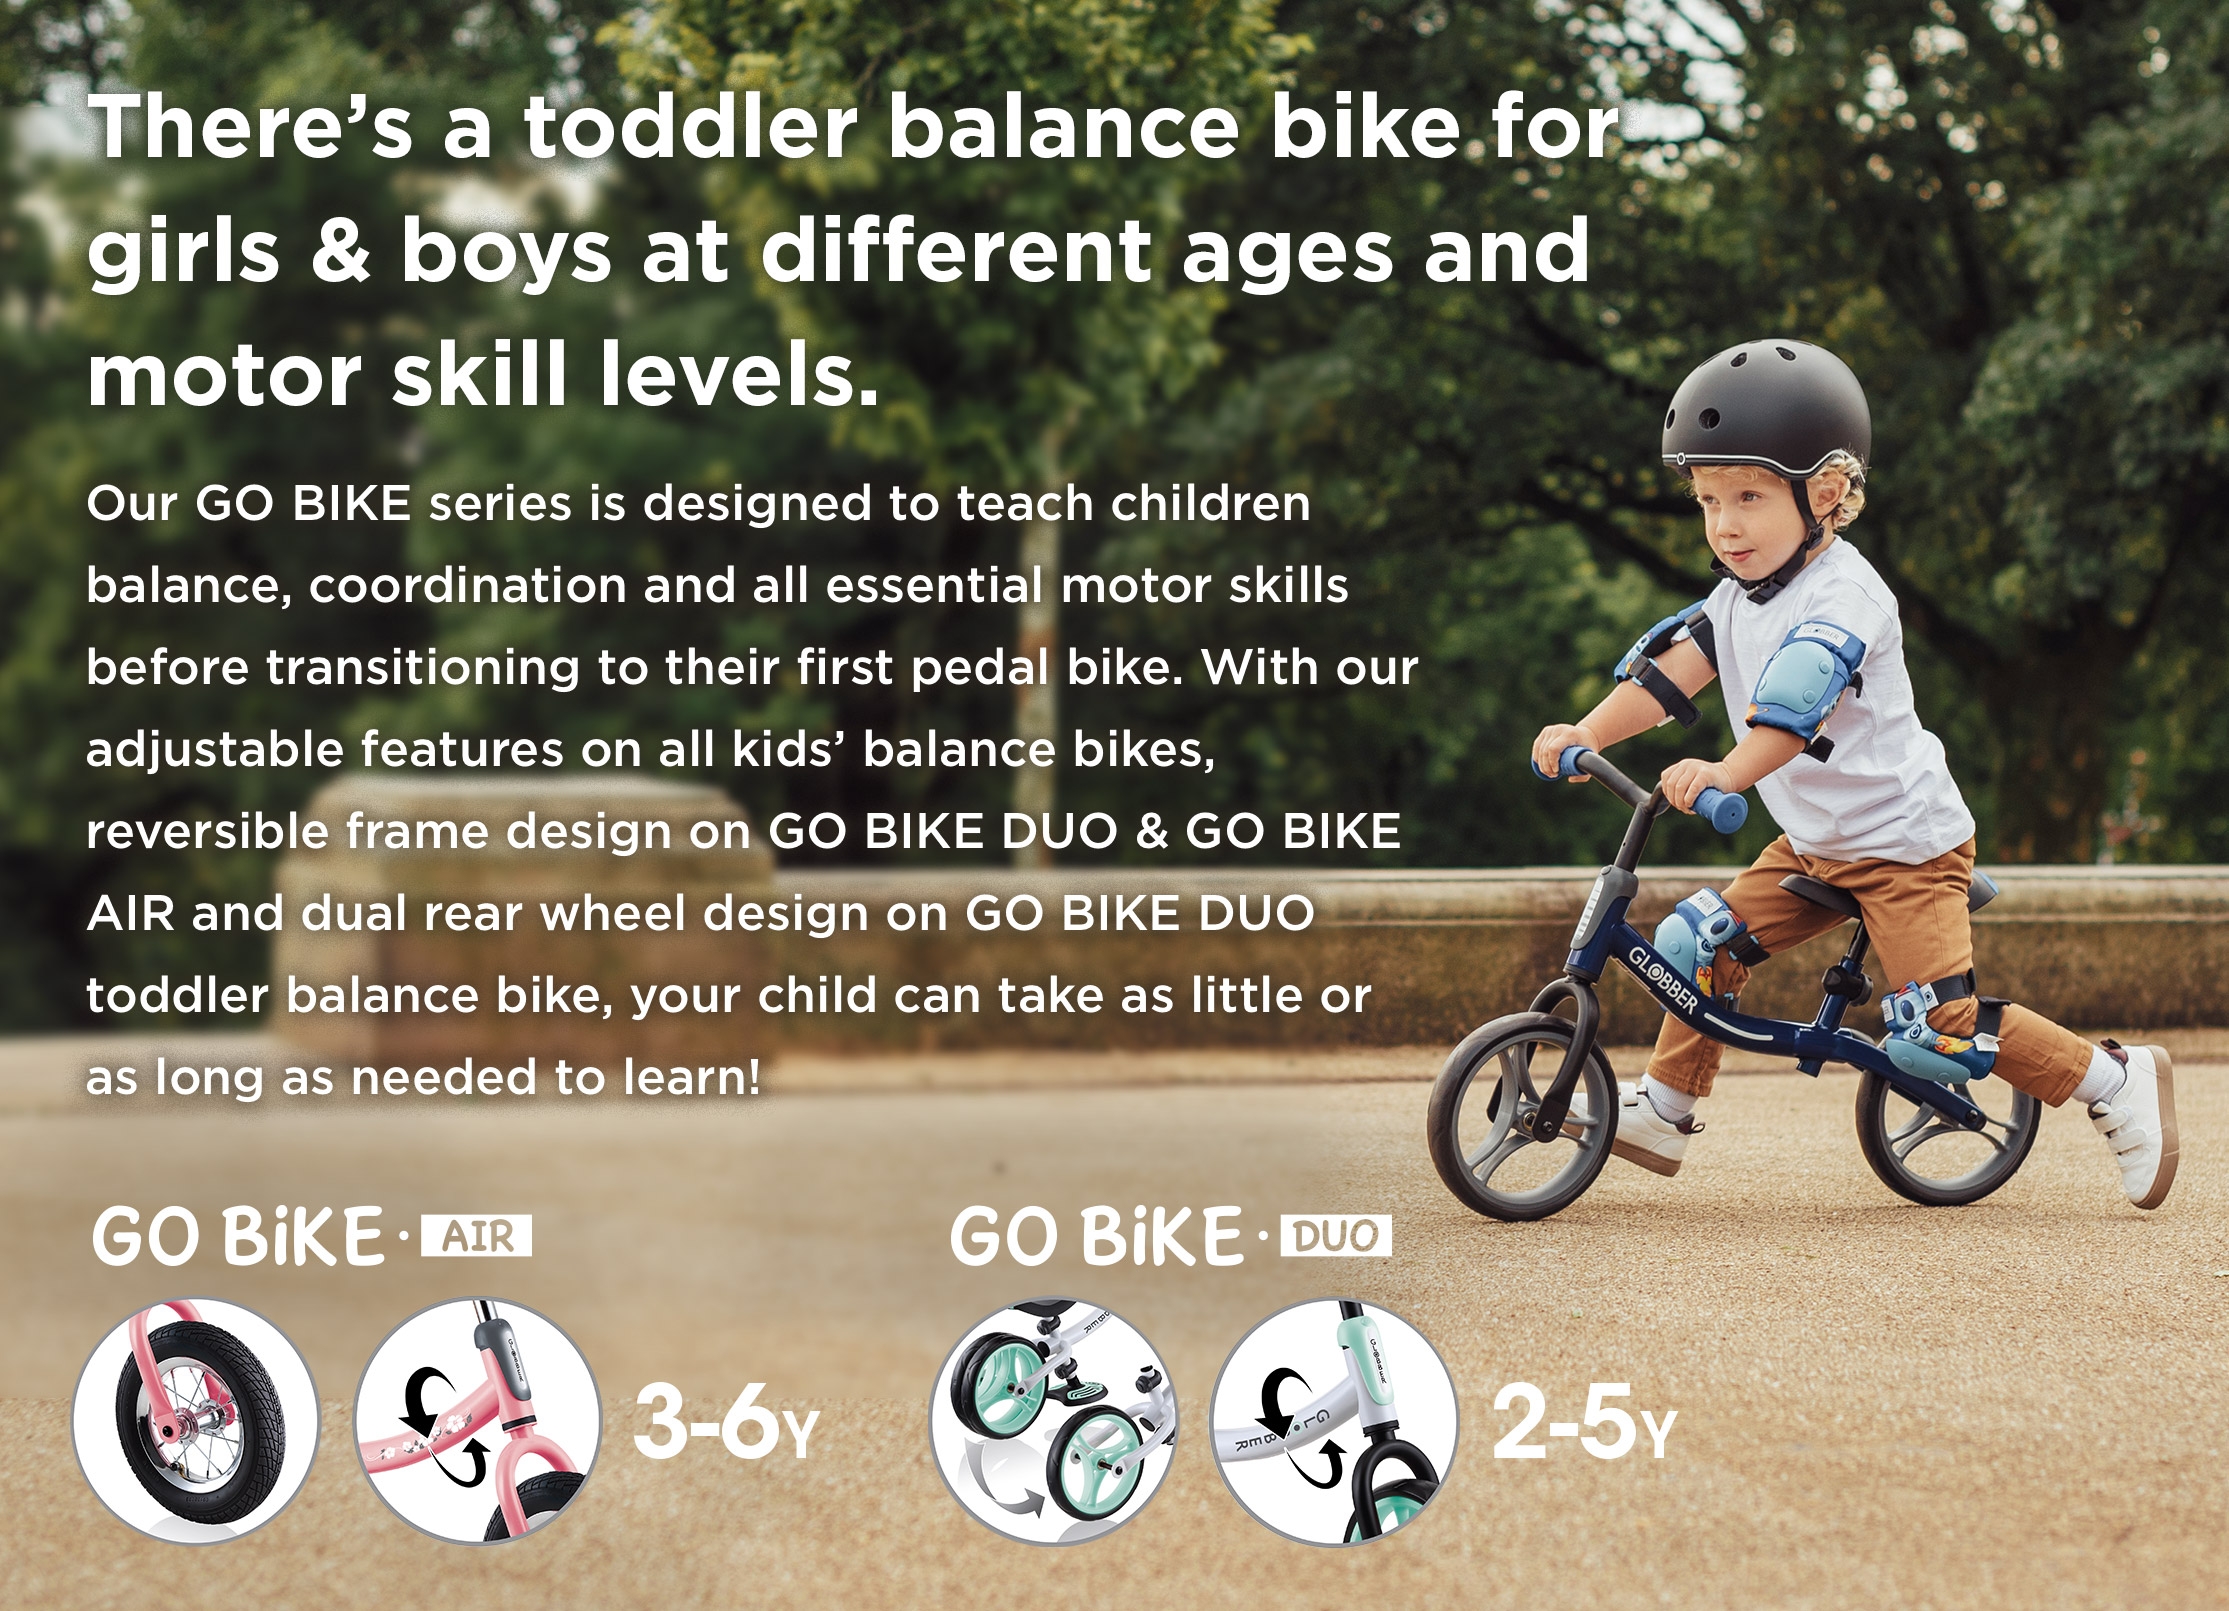 USP_GO-BIKE-toddler-balance-bike-for-girls-and-boys-with-adjustable-features